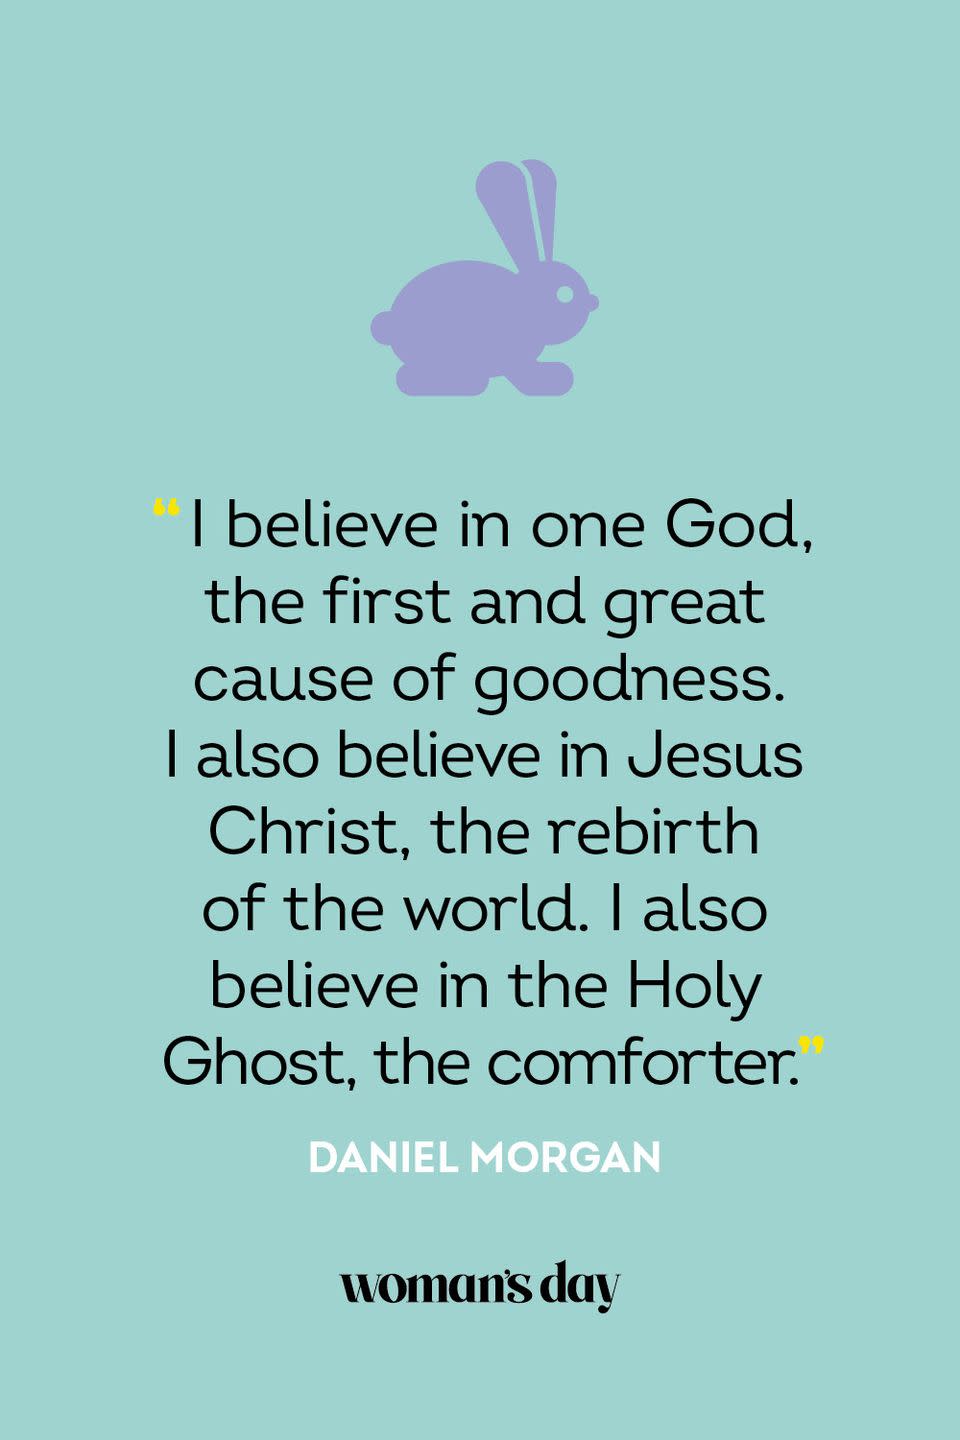 <p>“I believe in one God, the first and great cause of goodness. I also believe in Jesus Christ, the rebirth of the world. I also believe in the Holy Ghost, the comforter.” — Daniel Morgan</p>